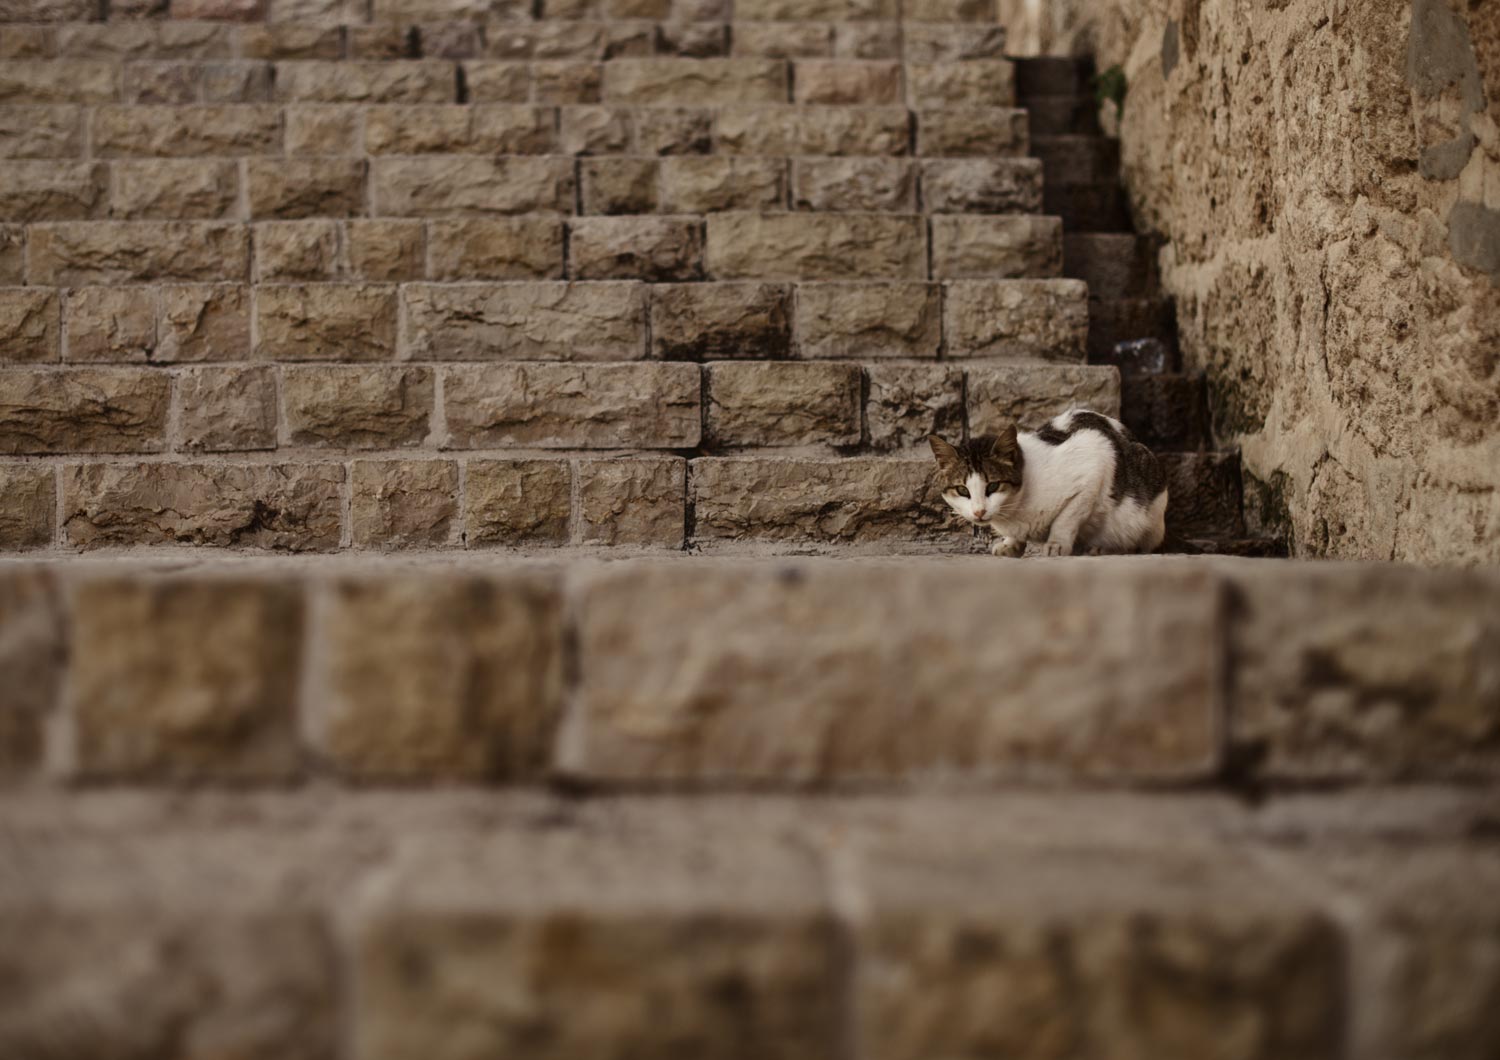  Jerusalem was filled with roaming cats. 